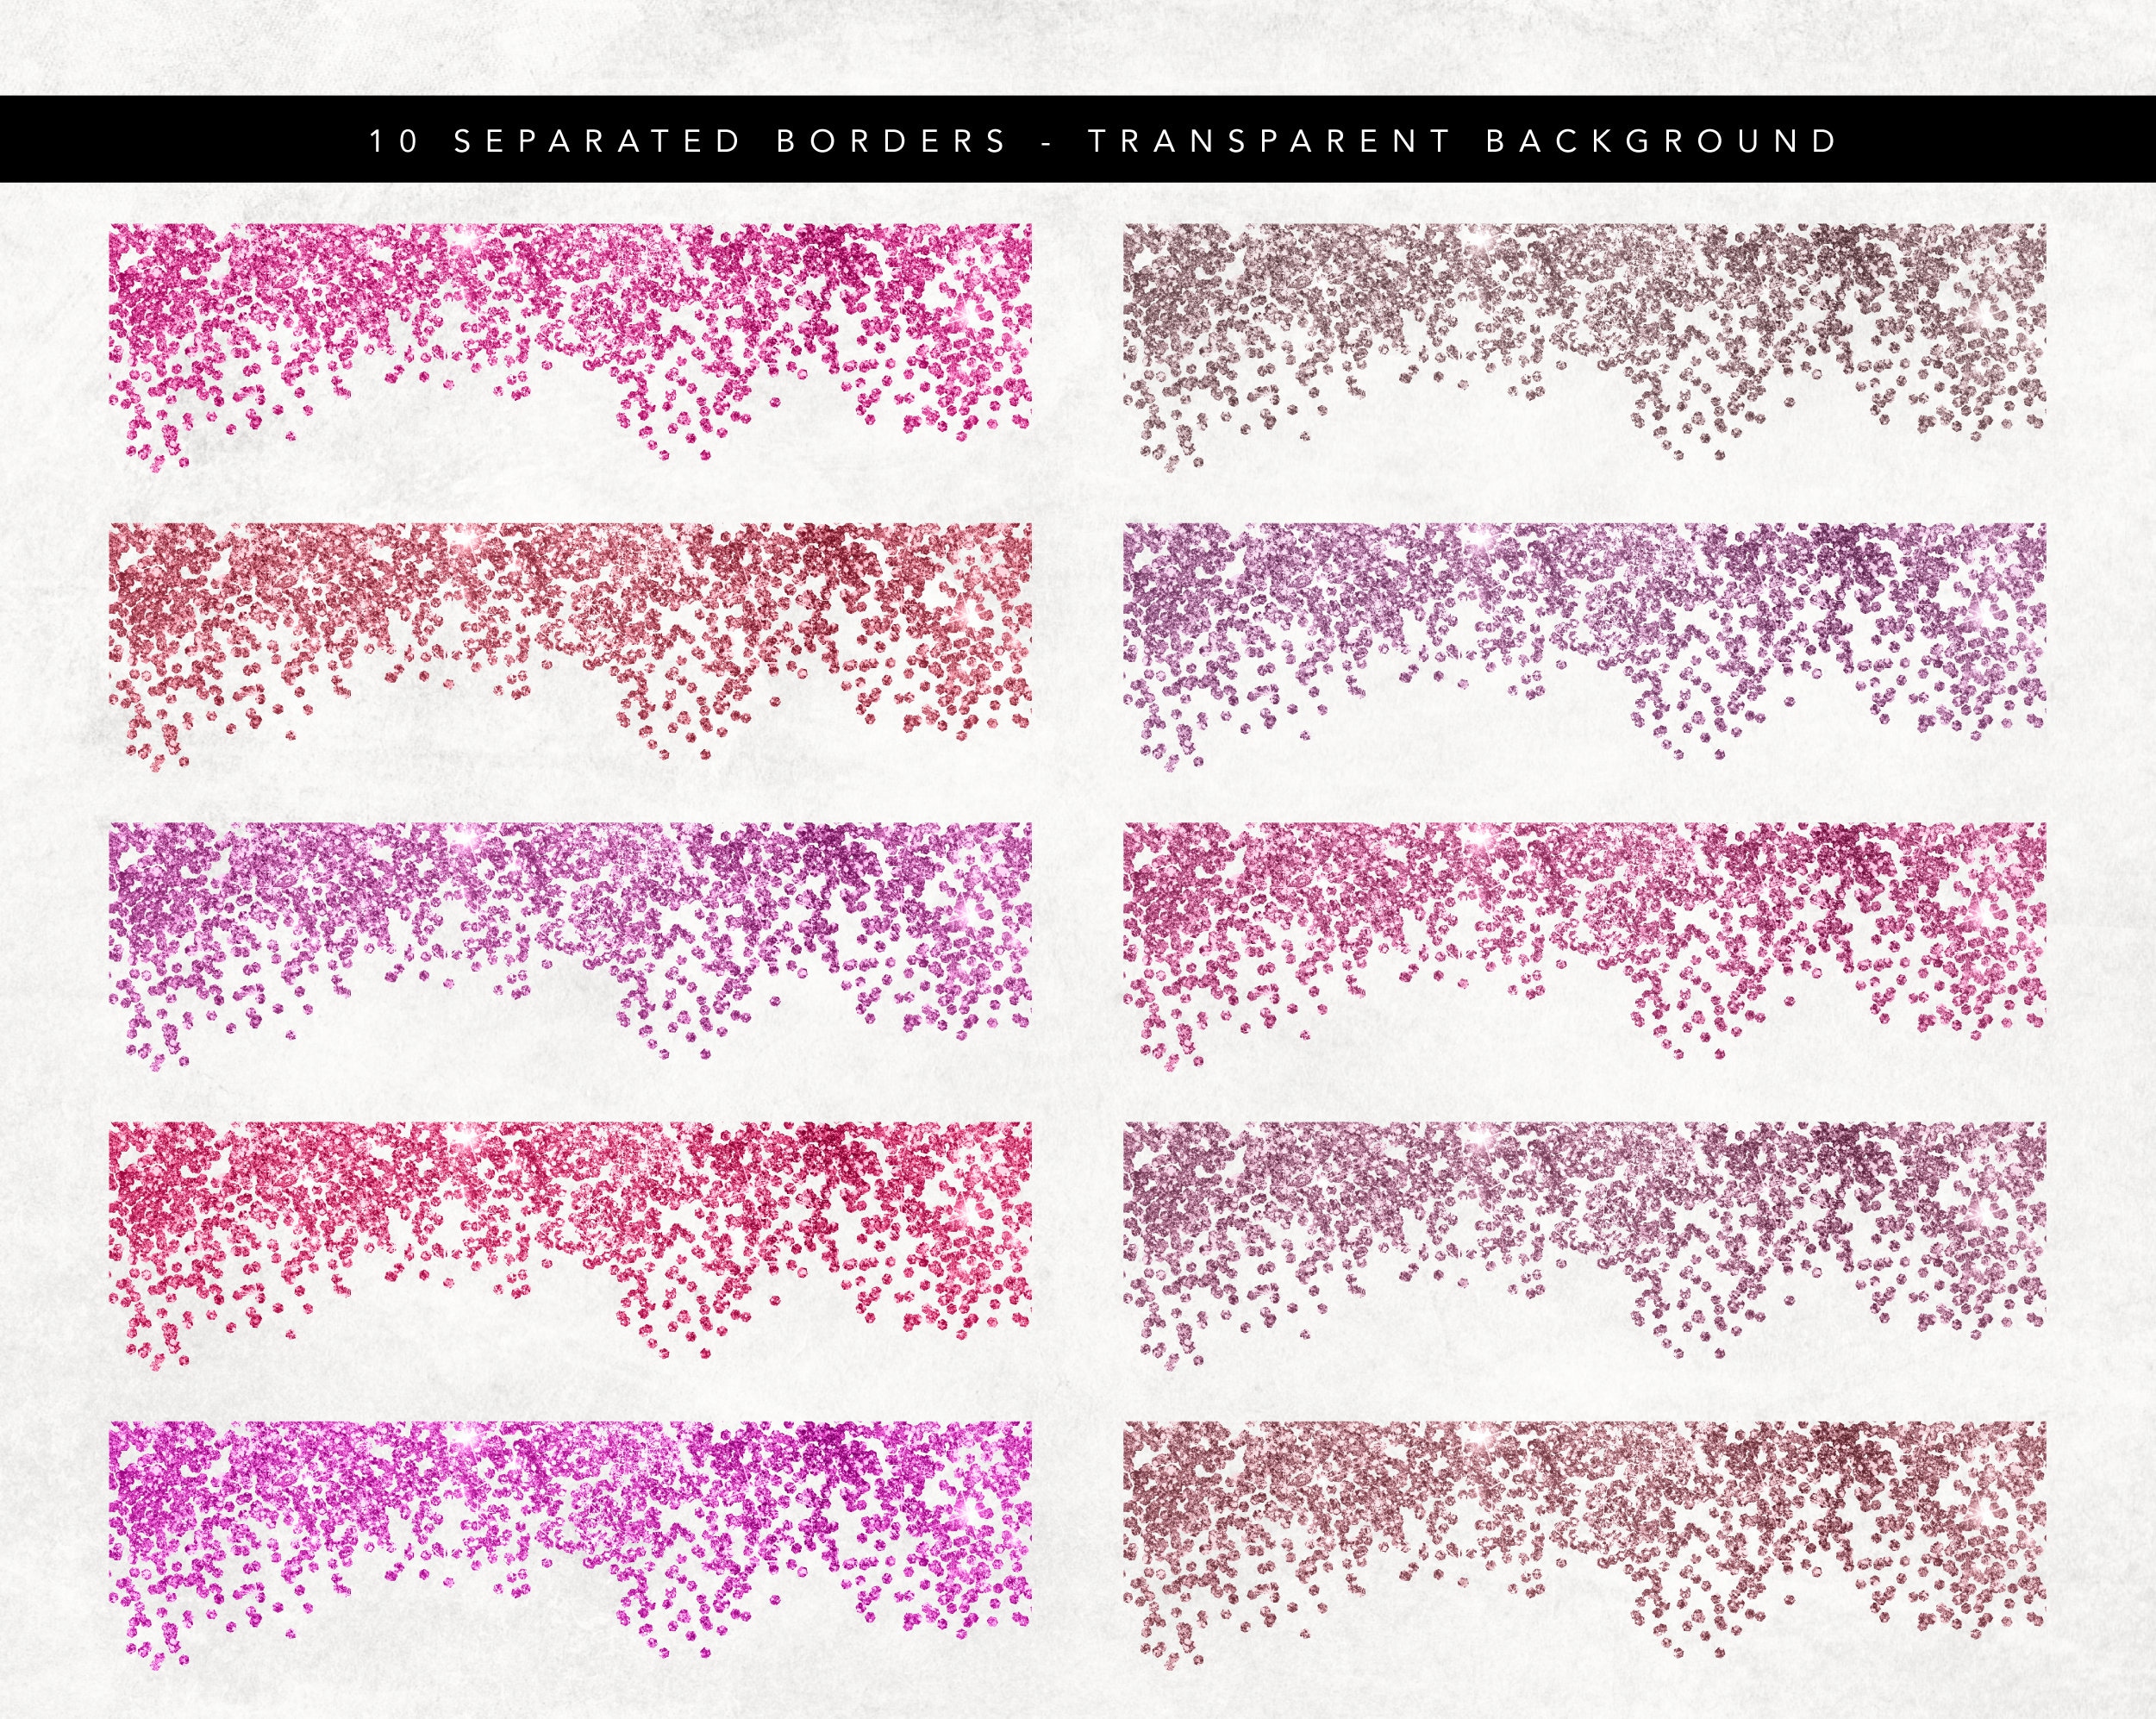 16 Glitter Confetti Border Overlay Papers By ArtInsider